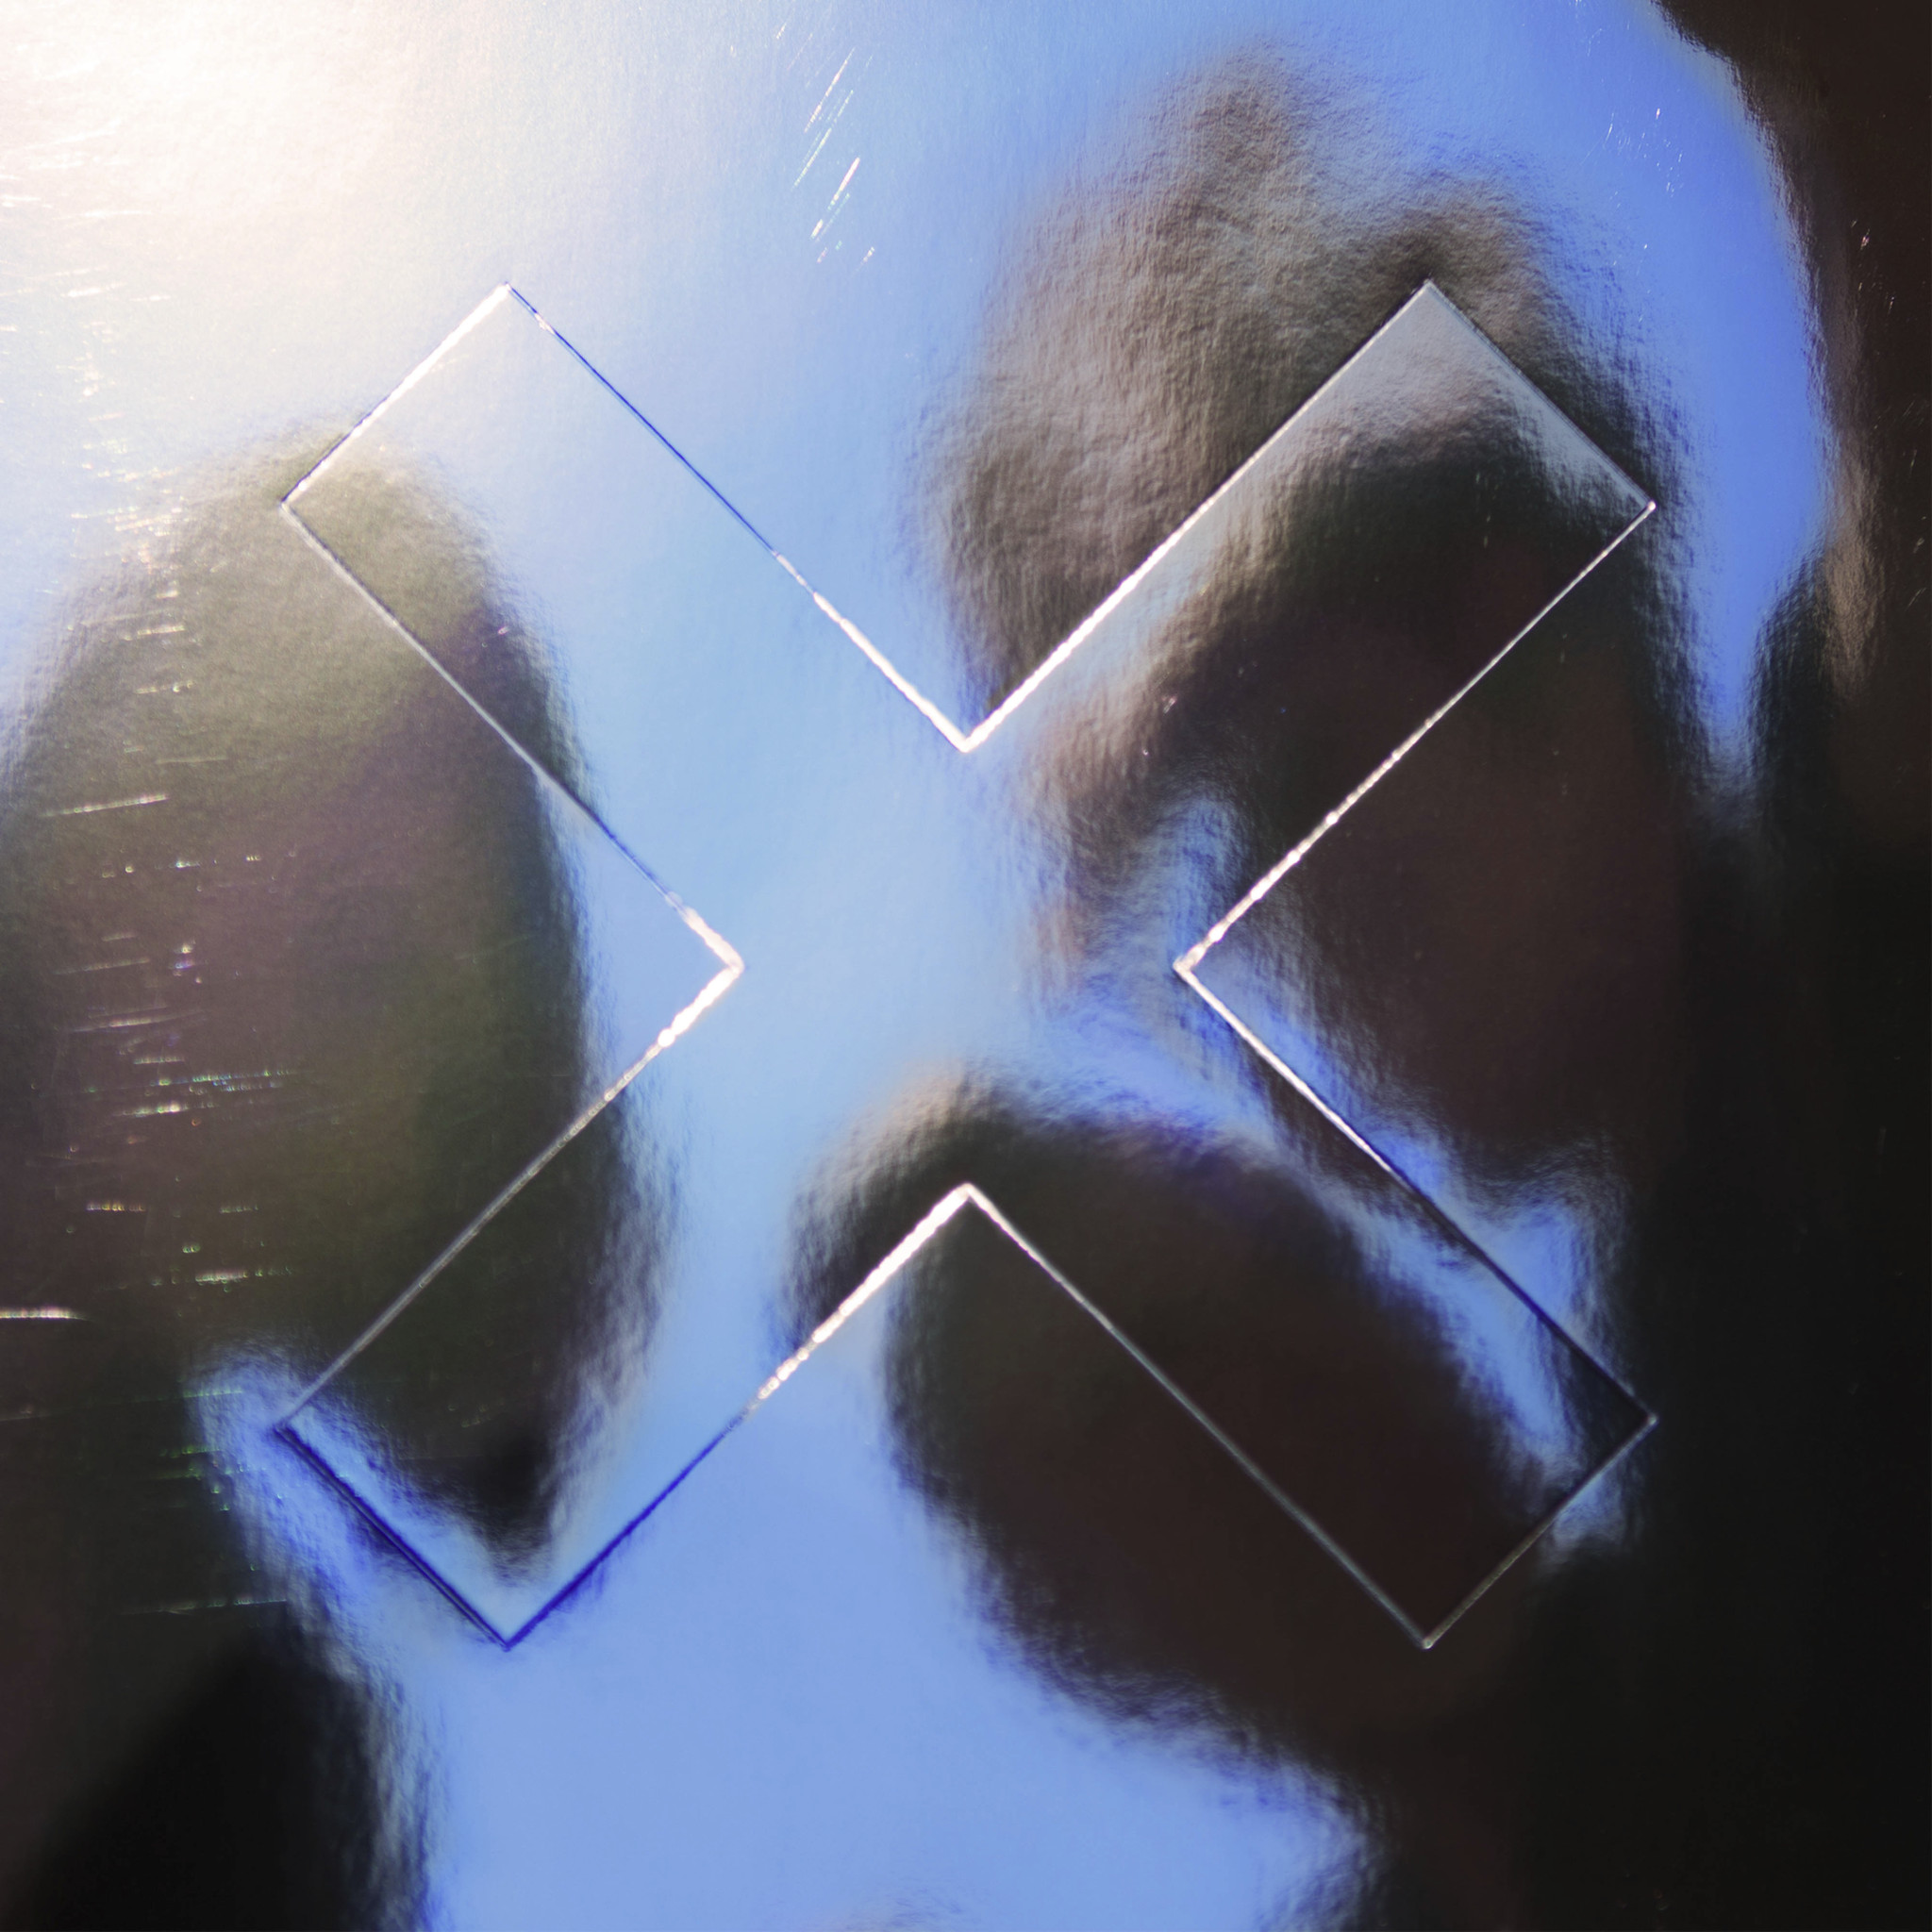 The xx “I See You” Review